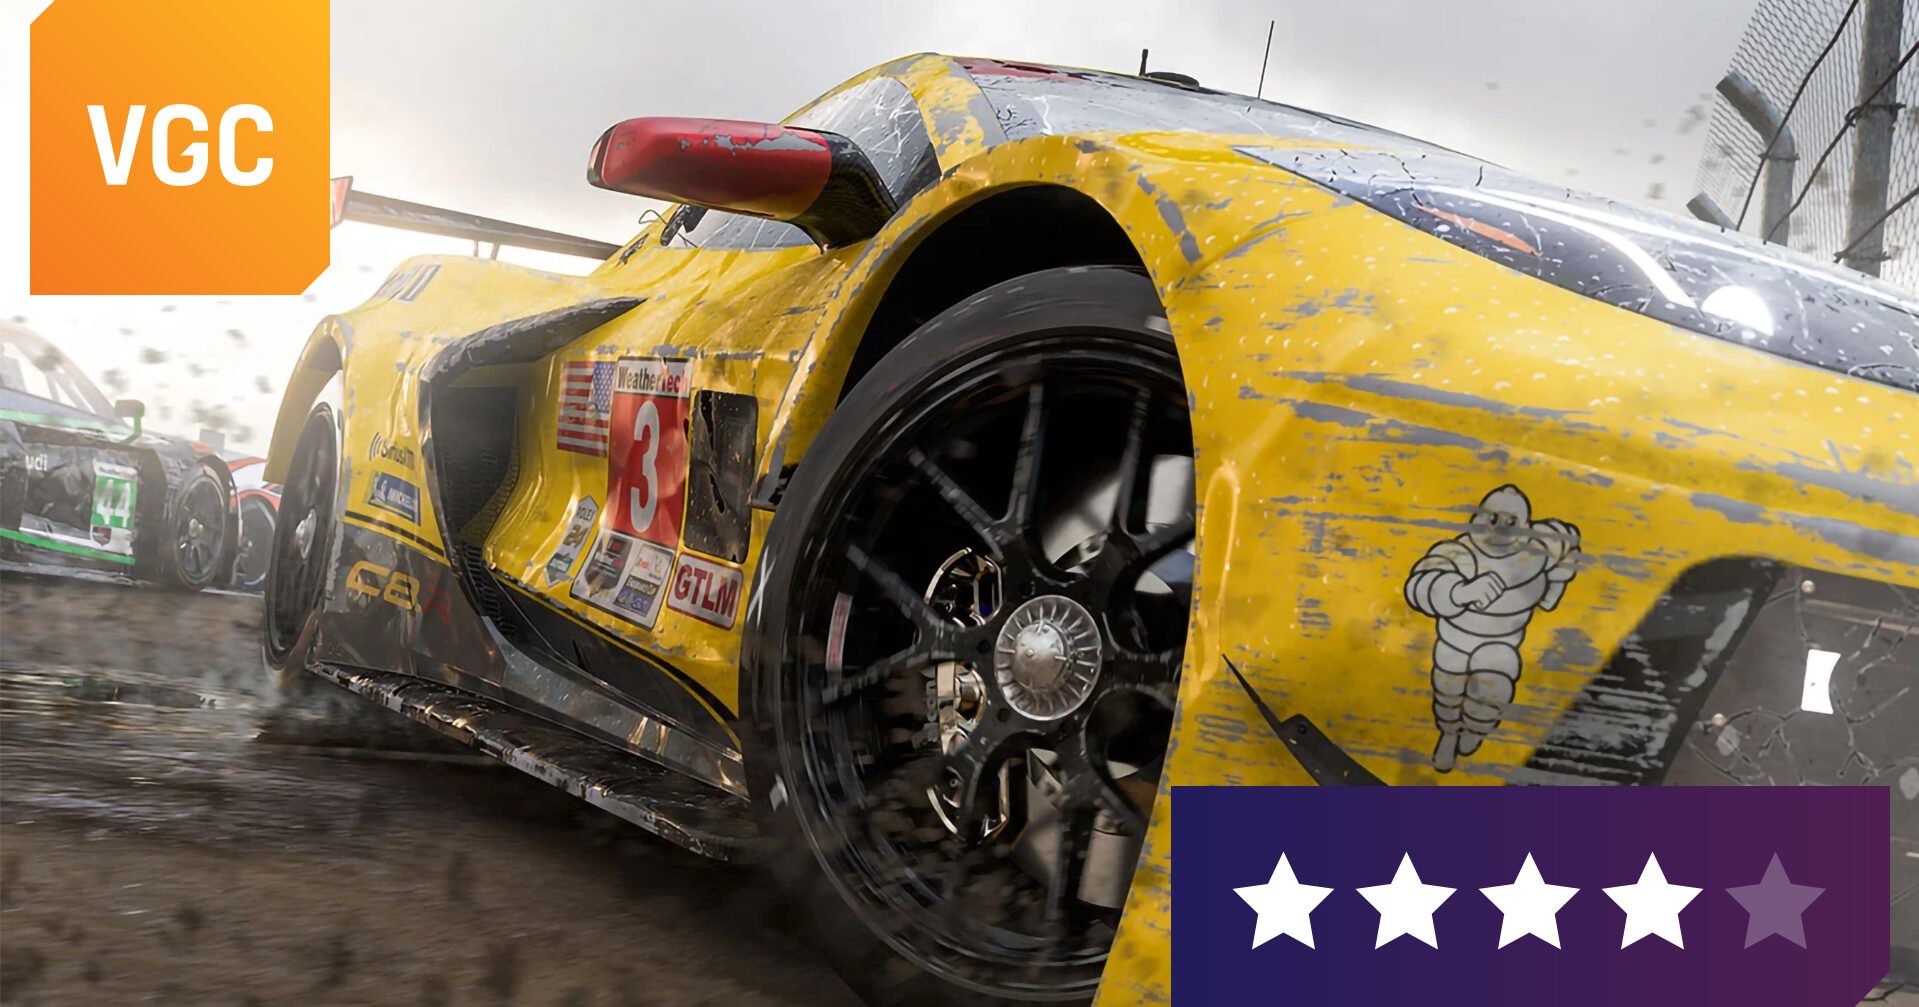 Forza Motorsport: Best cars for online races and Builders' Cup